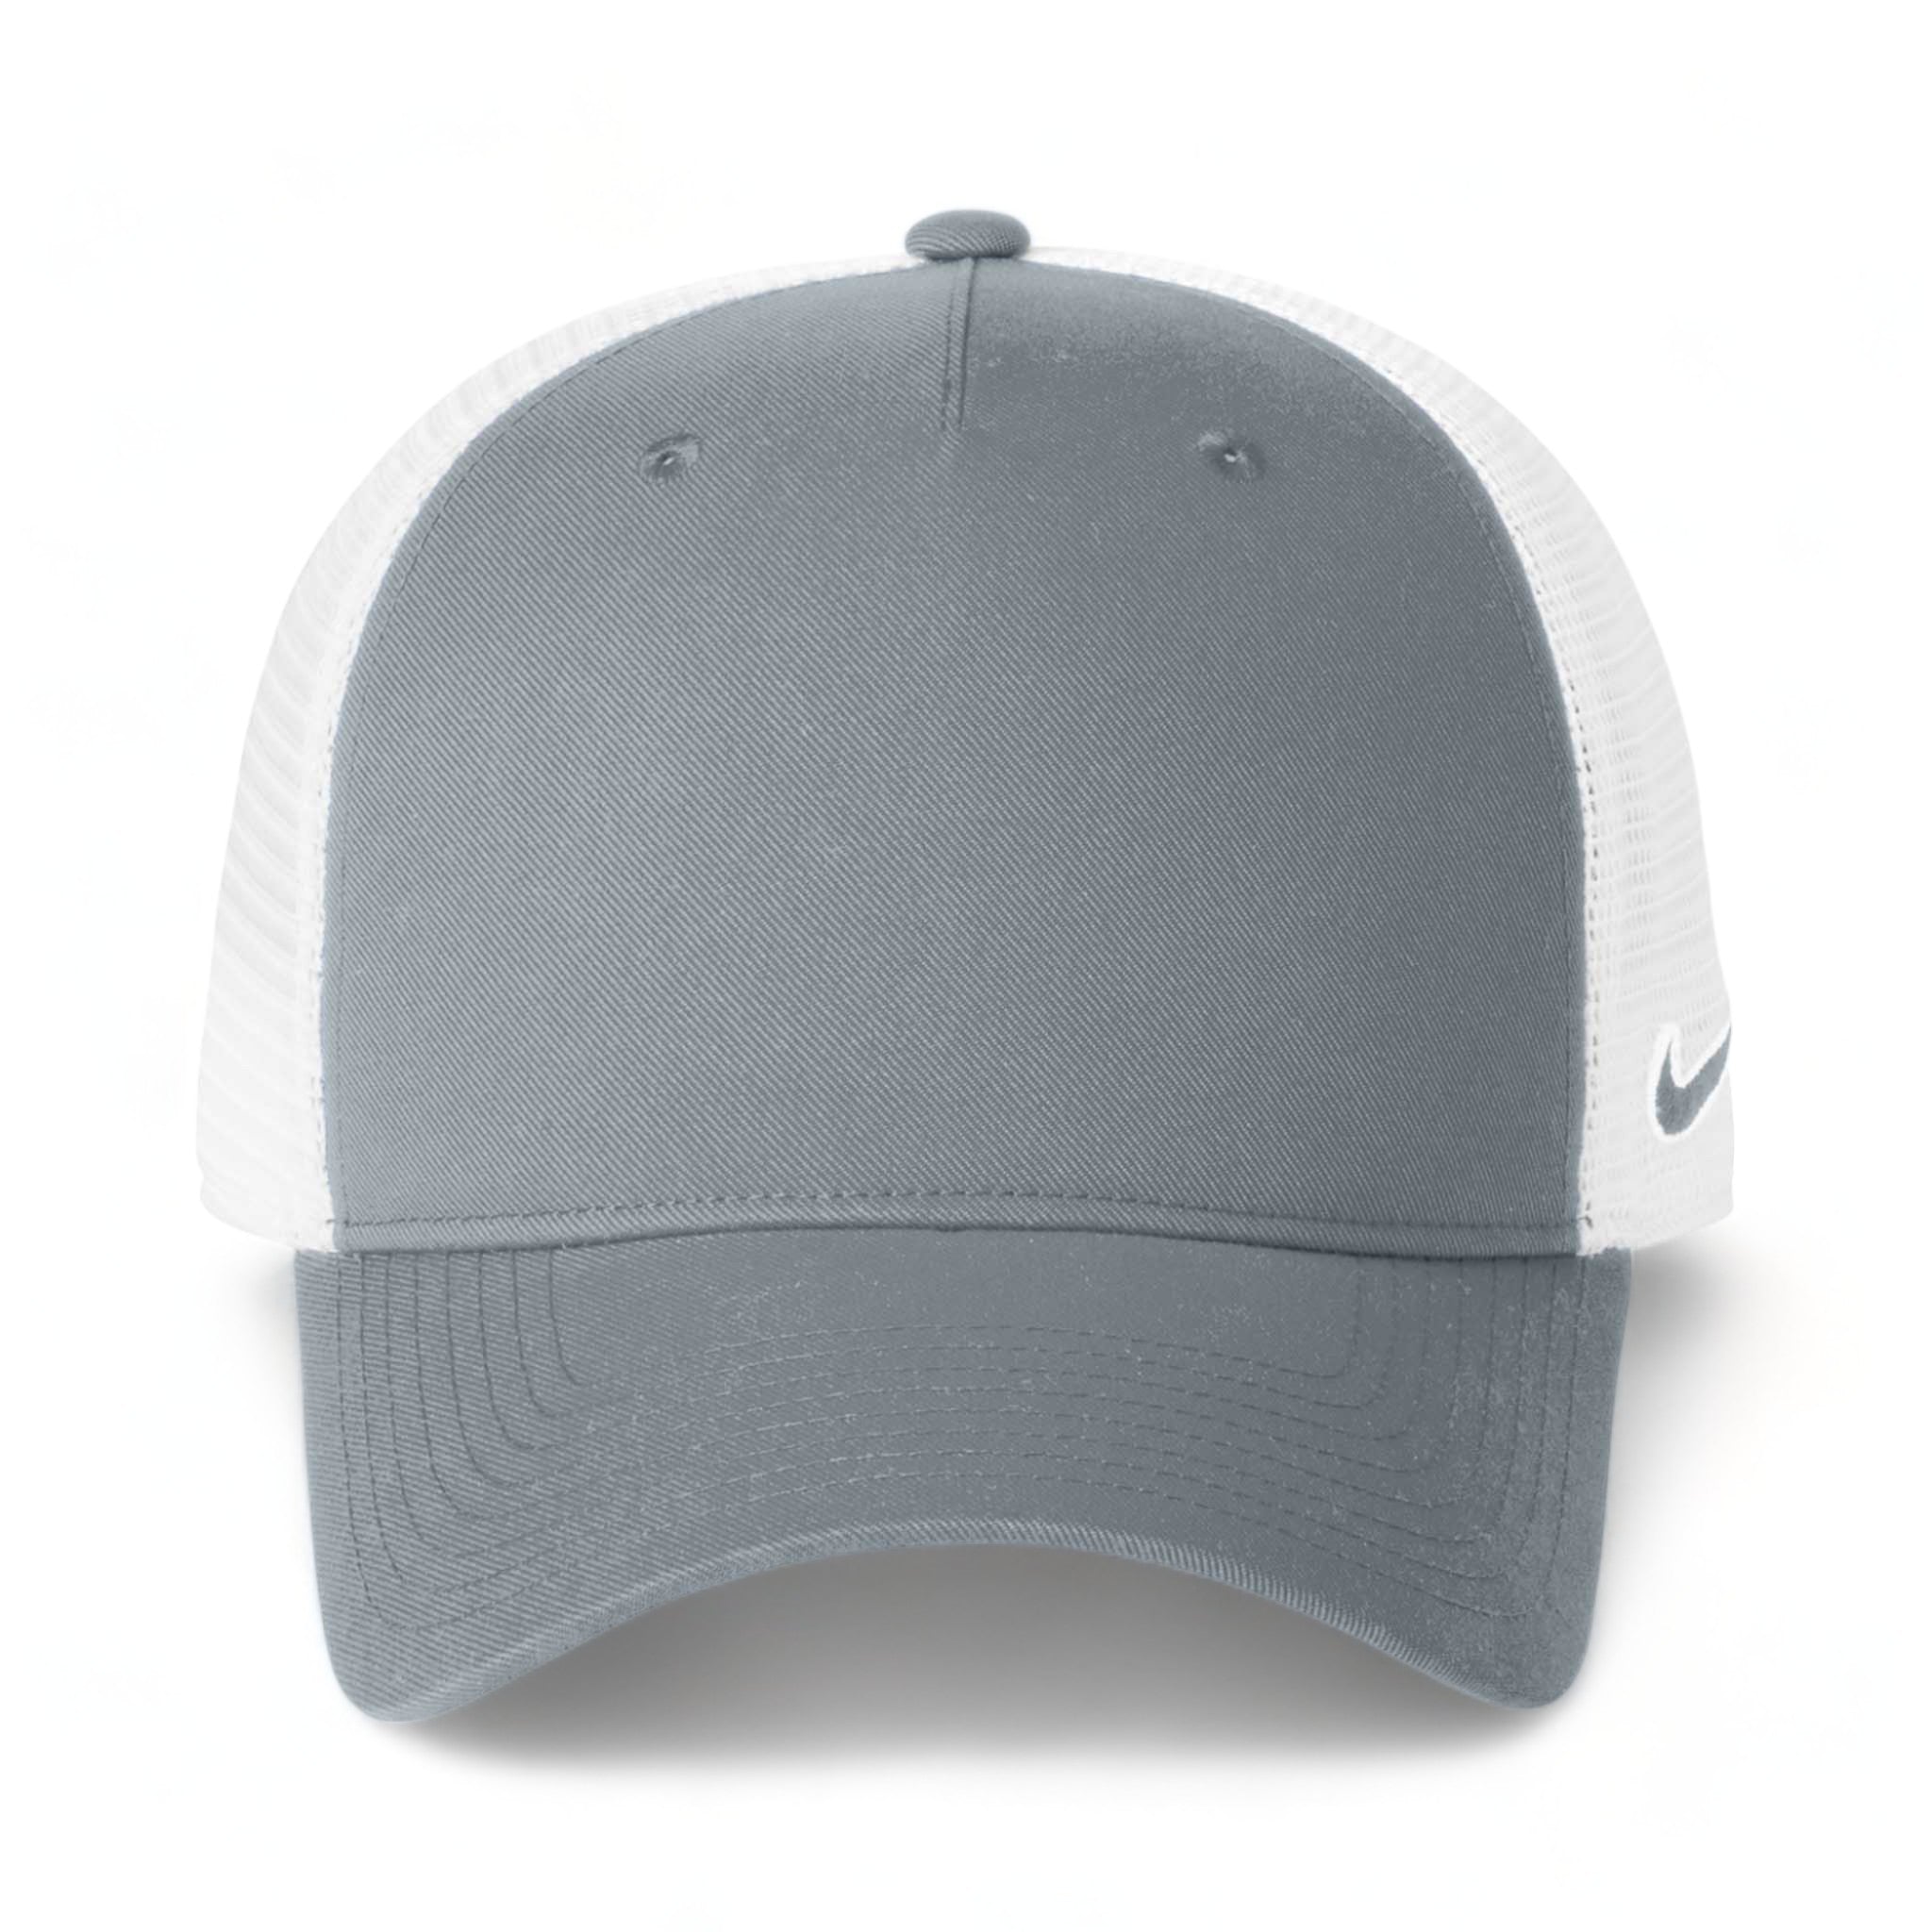 Front view of Nike NKFN9893 custom hat in cool grey and white